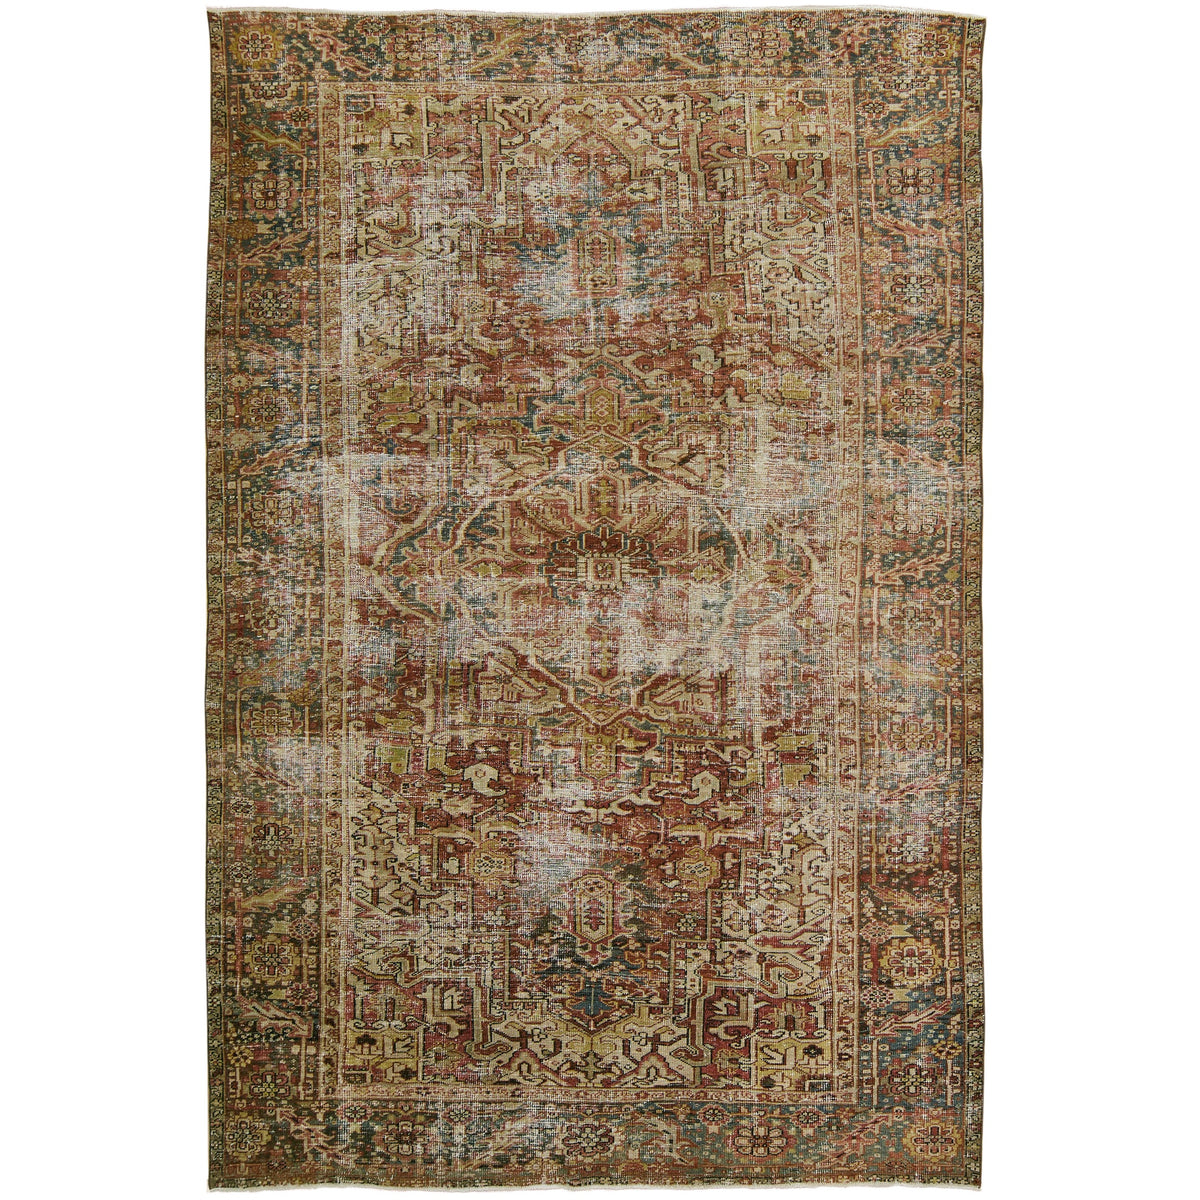 Daneal - Heritage and Hue in Harmony | Kuden Rugs